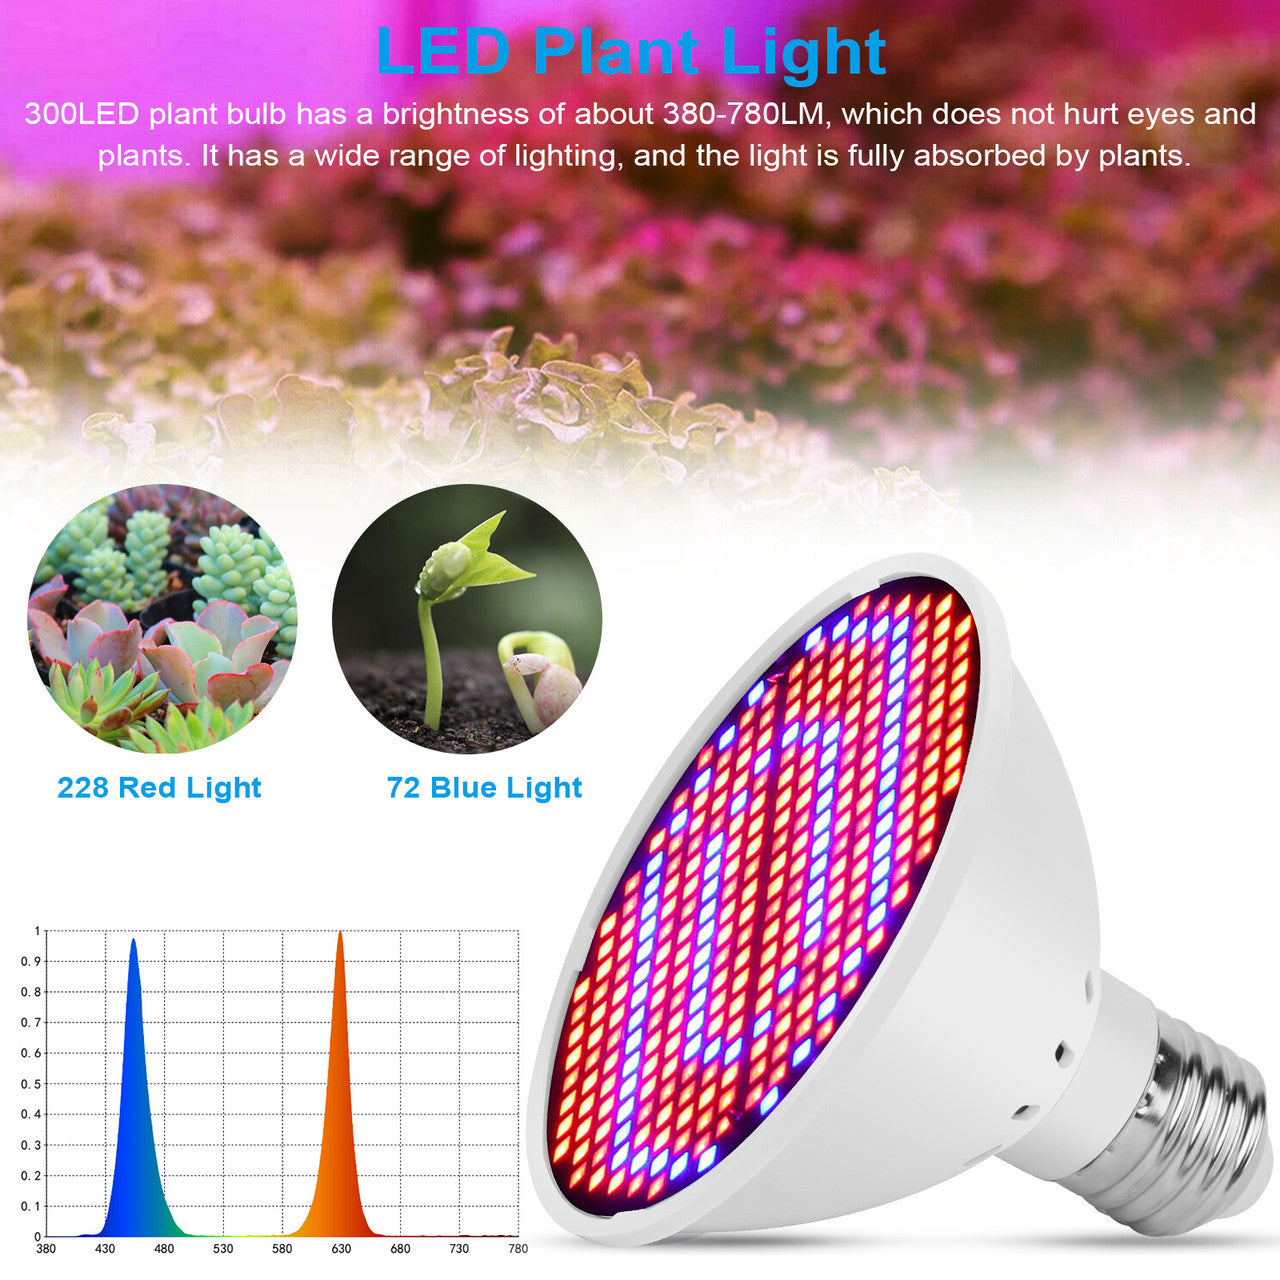 300 LED Plant Grow Light Bulb - Indoor Plants Full Spectrum Lamp Red Blue LED Seed Starting,House,Garden,Succulent,Greenhouse Growing